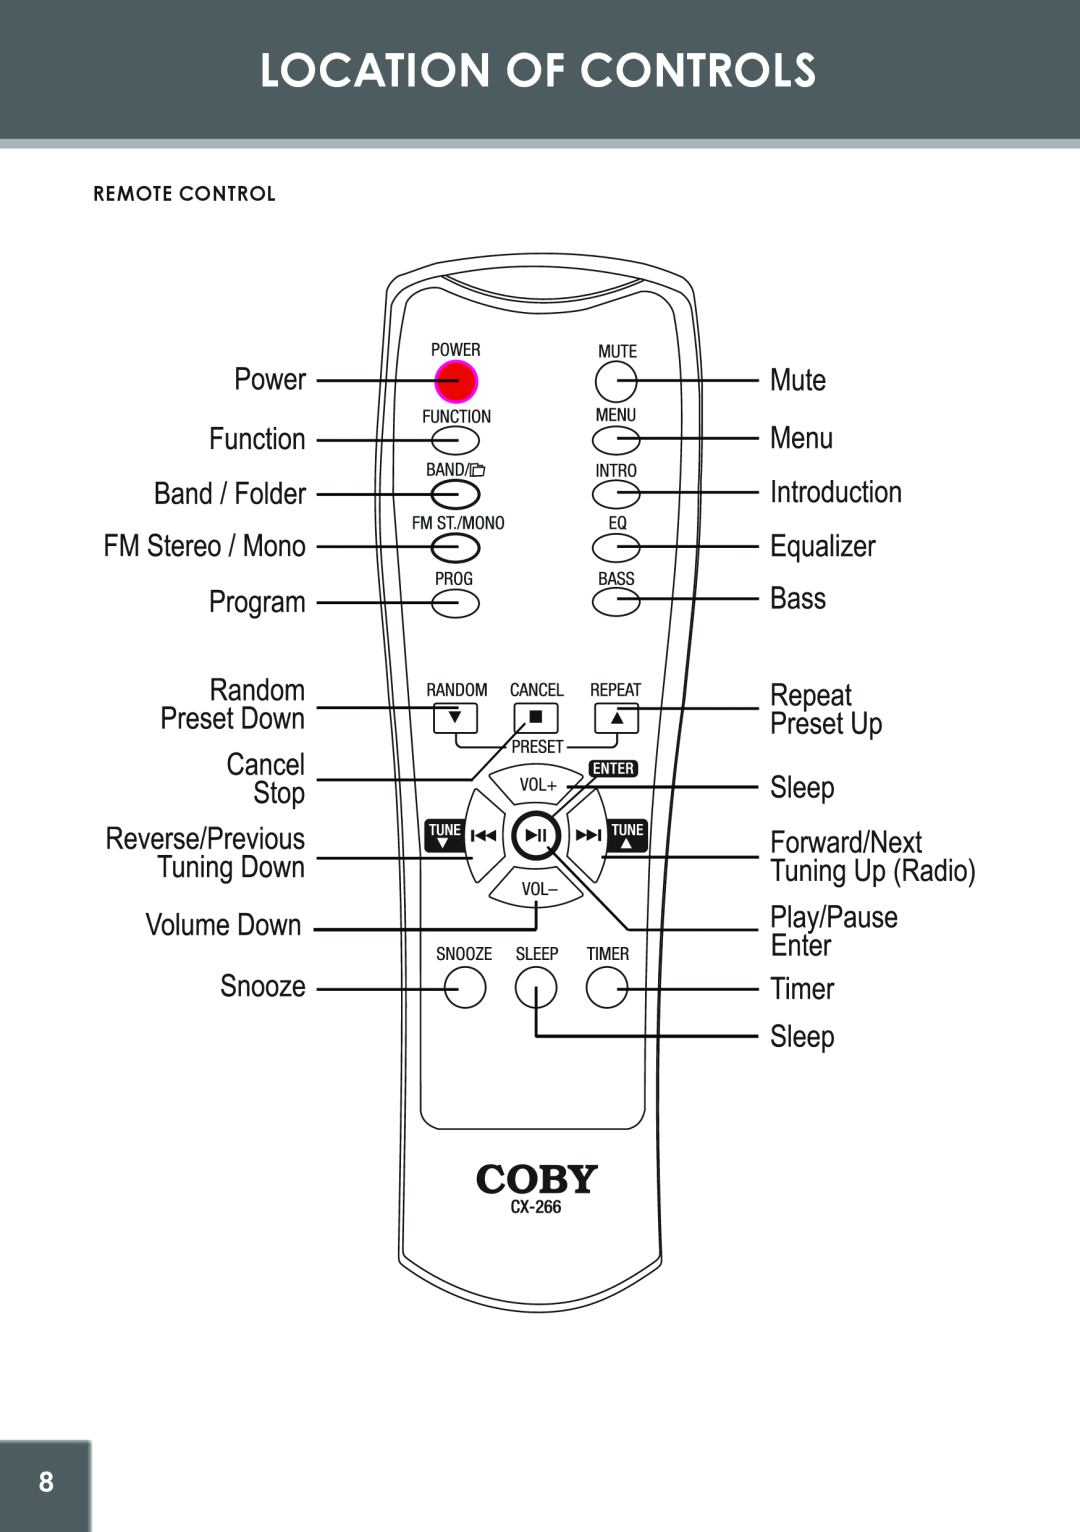 COBY electronic CX-266 instruction manual Remote Control, Location Of Controls 